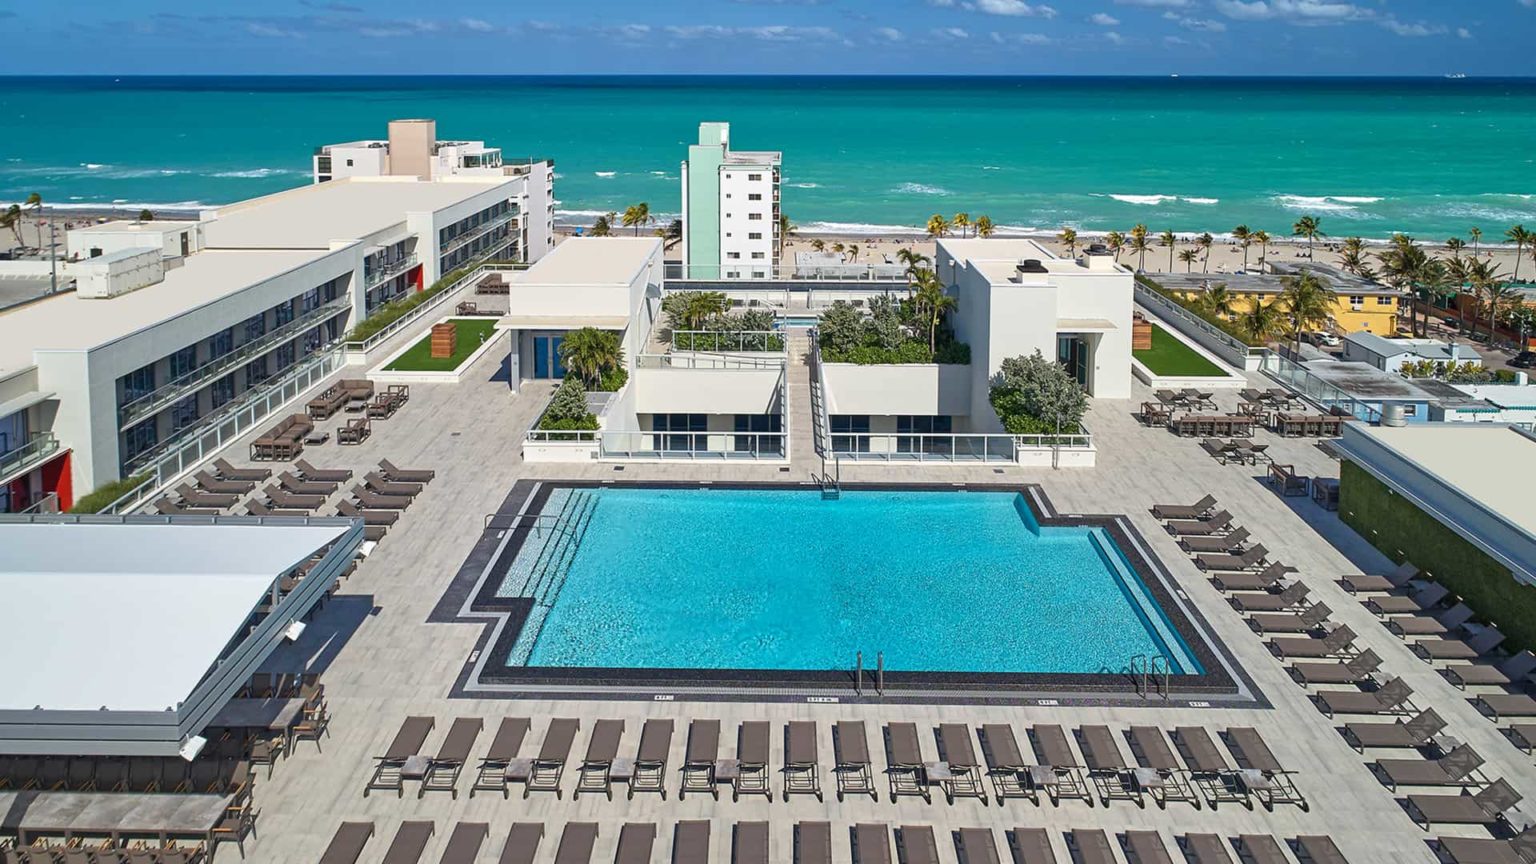 Aerial view of Costa Hollywood Beach Resort pool overlooking the beach